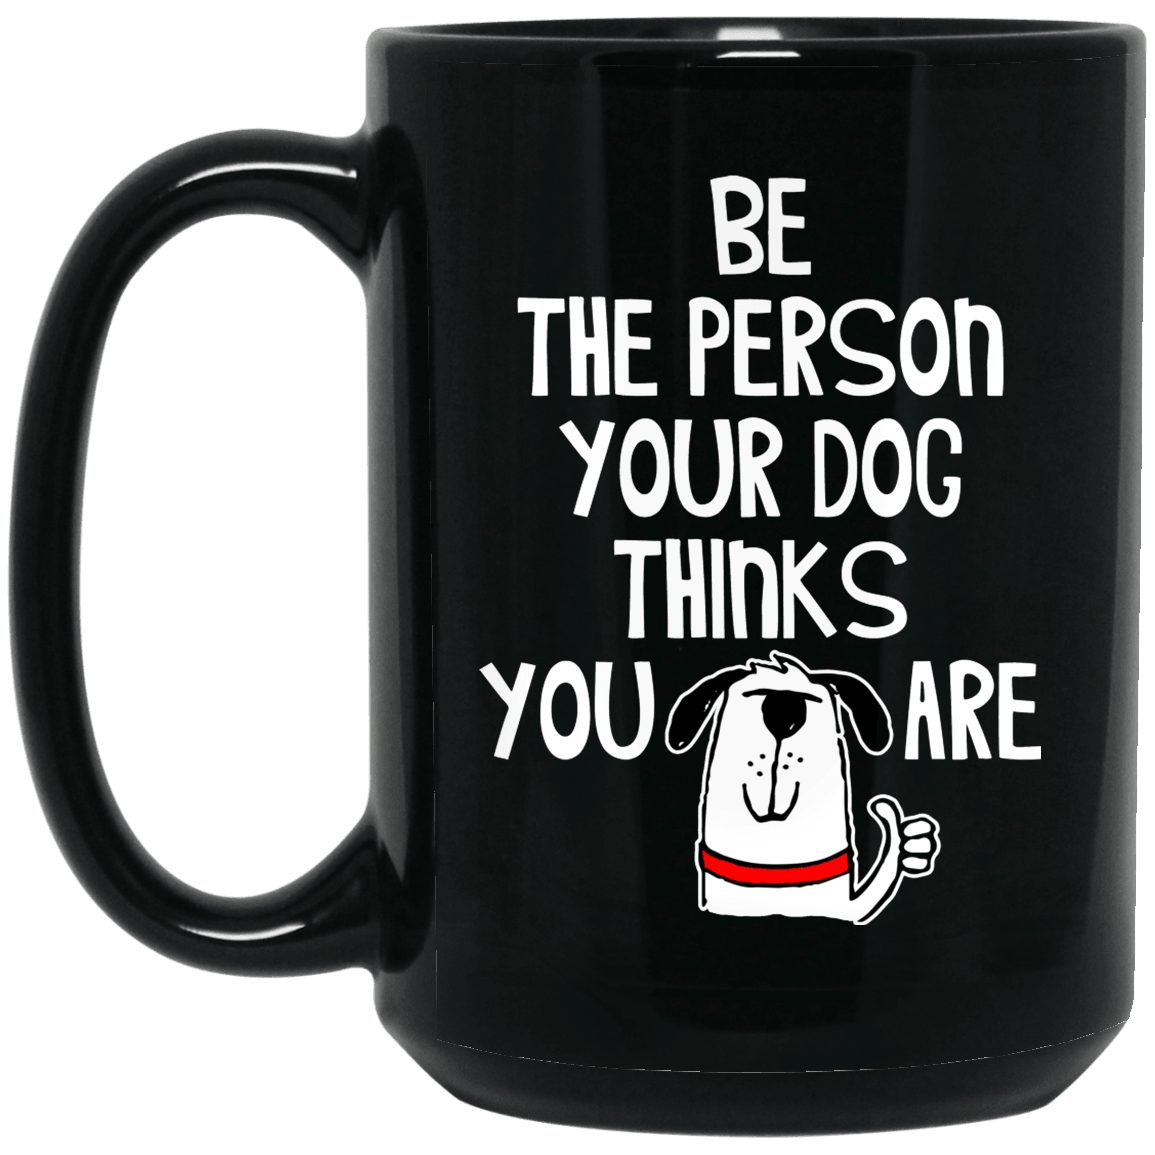 Designs by MyUtopia Shout Out:Be The Person Your Dog Thinks You Are 15 oz. Ceramic Coffee Mug - Black,Black / 15 oz,Ceramic Coffee Mug